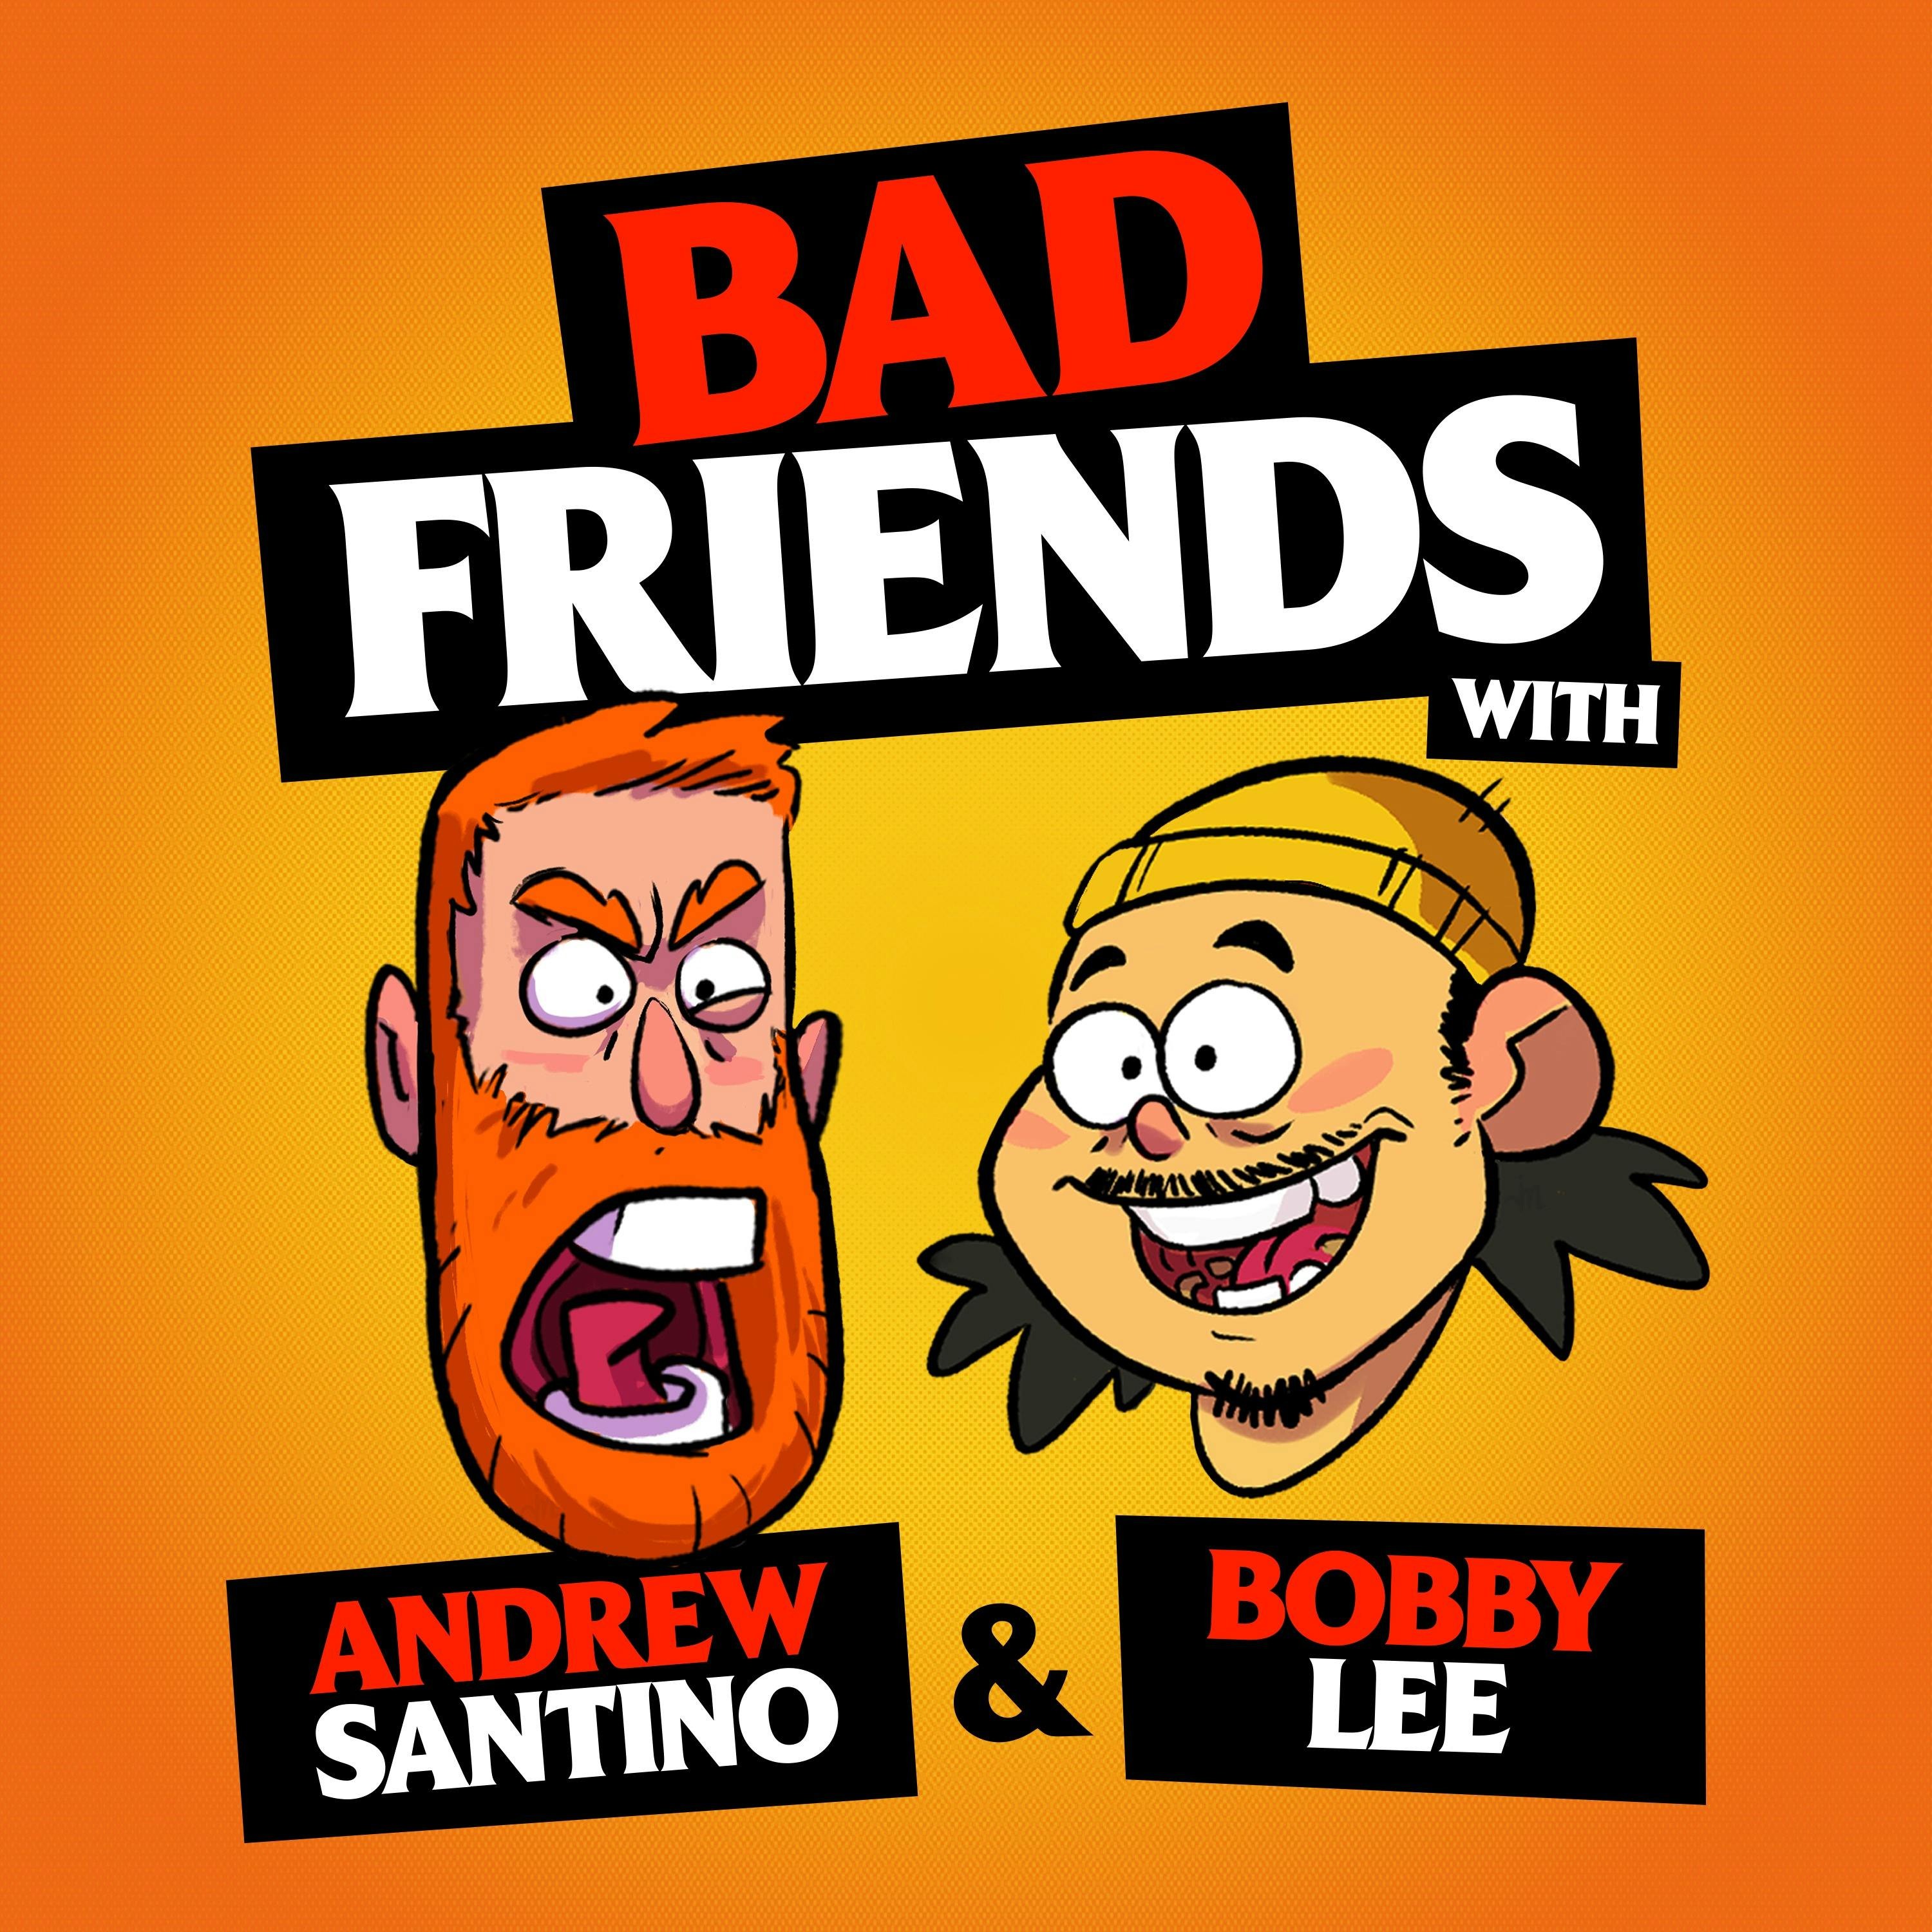 No Tater Tots In Spain by Andrew Santino and Bobby Lee